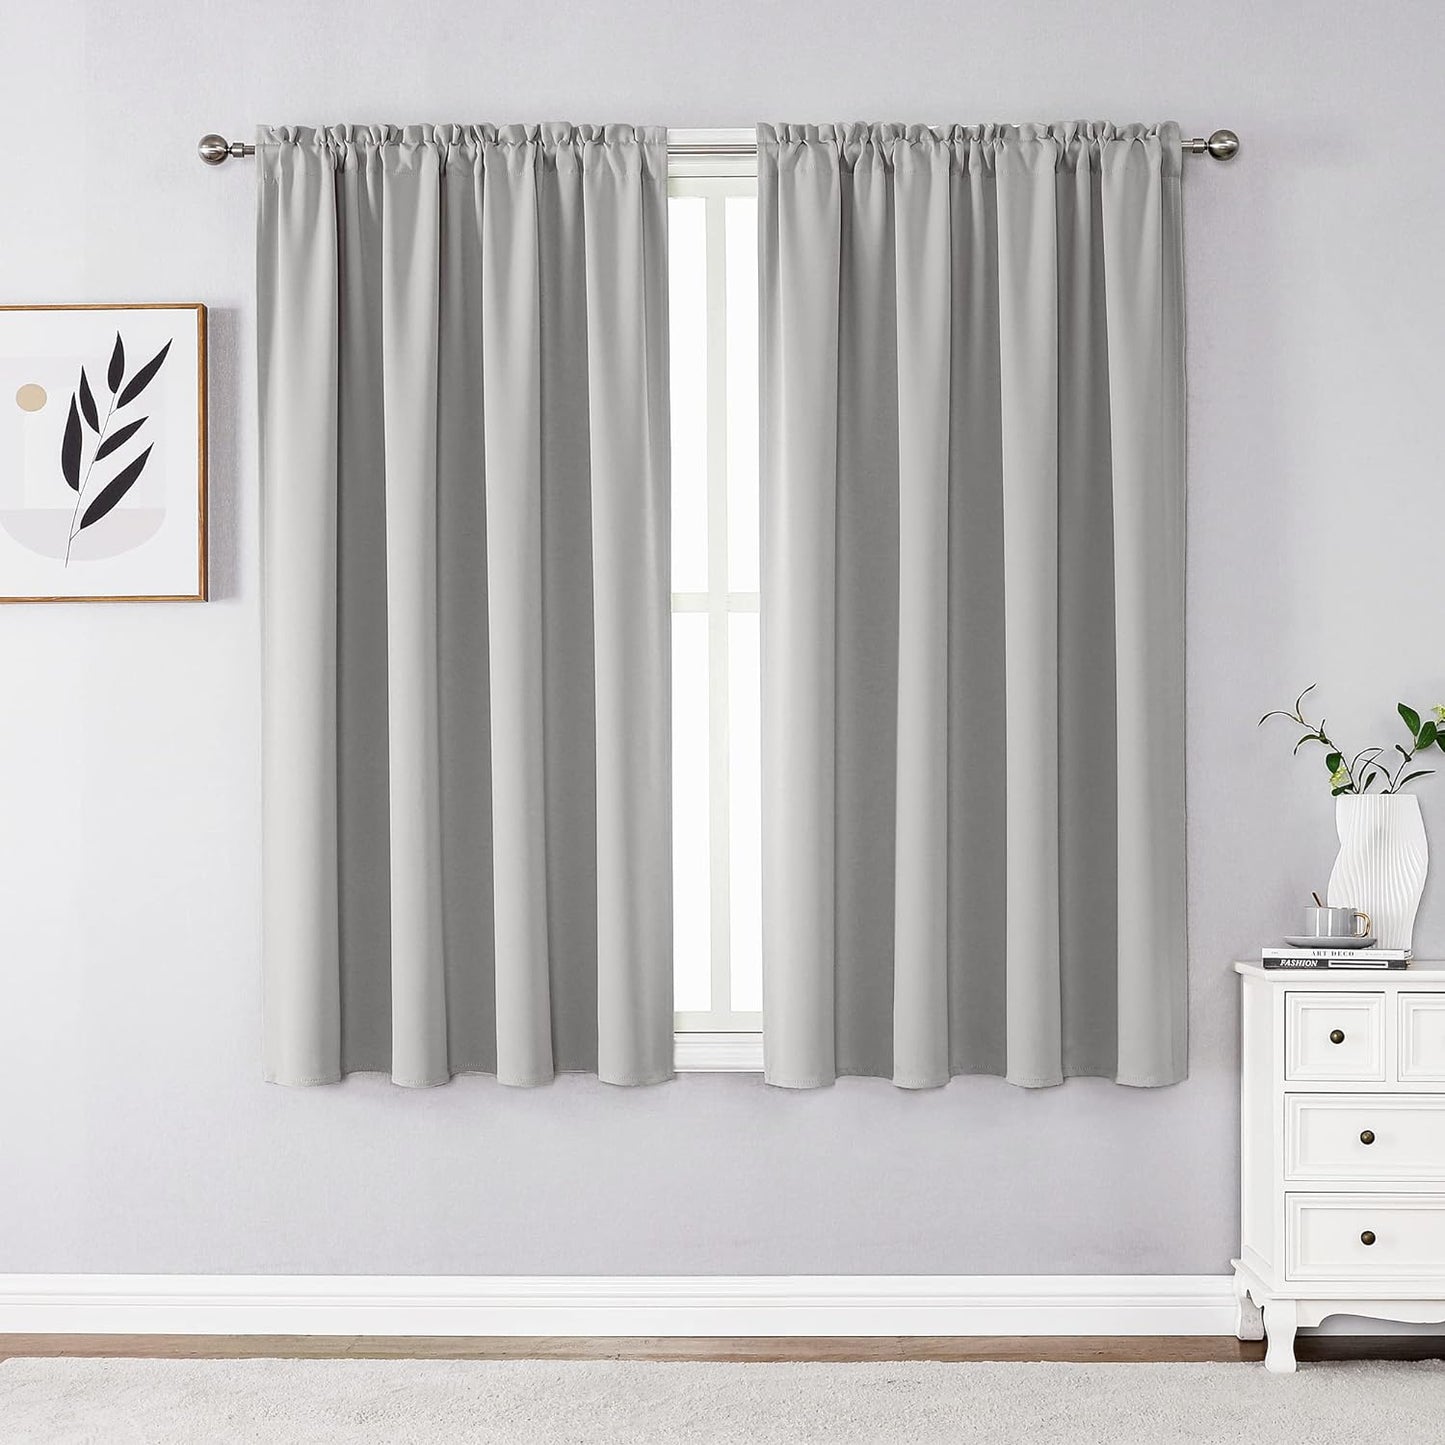 CUCRAF Blackout Curtains 84 Inches Long for Living Room, Light Beige Room Darkening Window Curtain Panels, Rod Pocket Thermal Insulated Solid Drapes for Bedroom, 52X84 Inch, Set of 2 Panels  CUCRAF Greywish White 52W X 54L Inch 2 Panels 